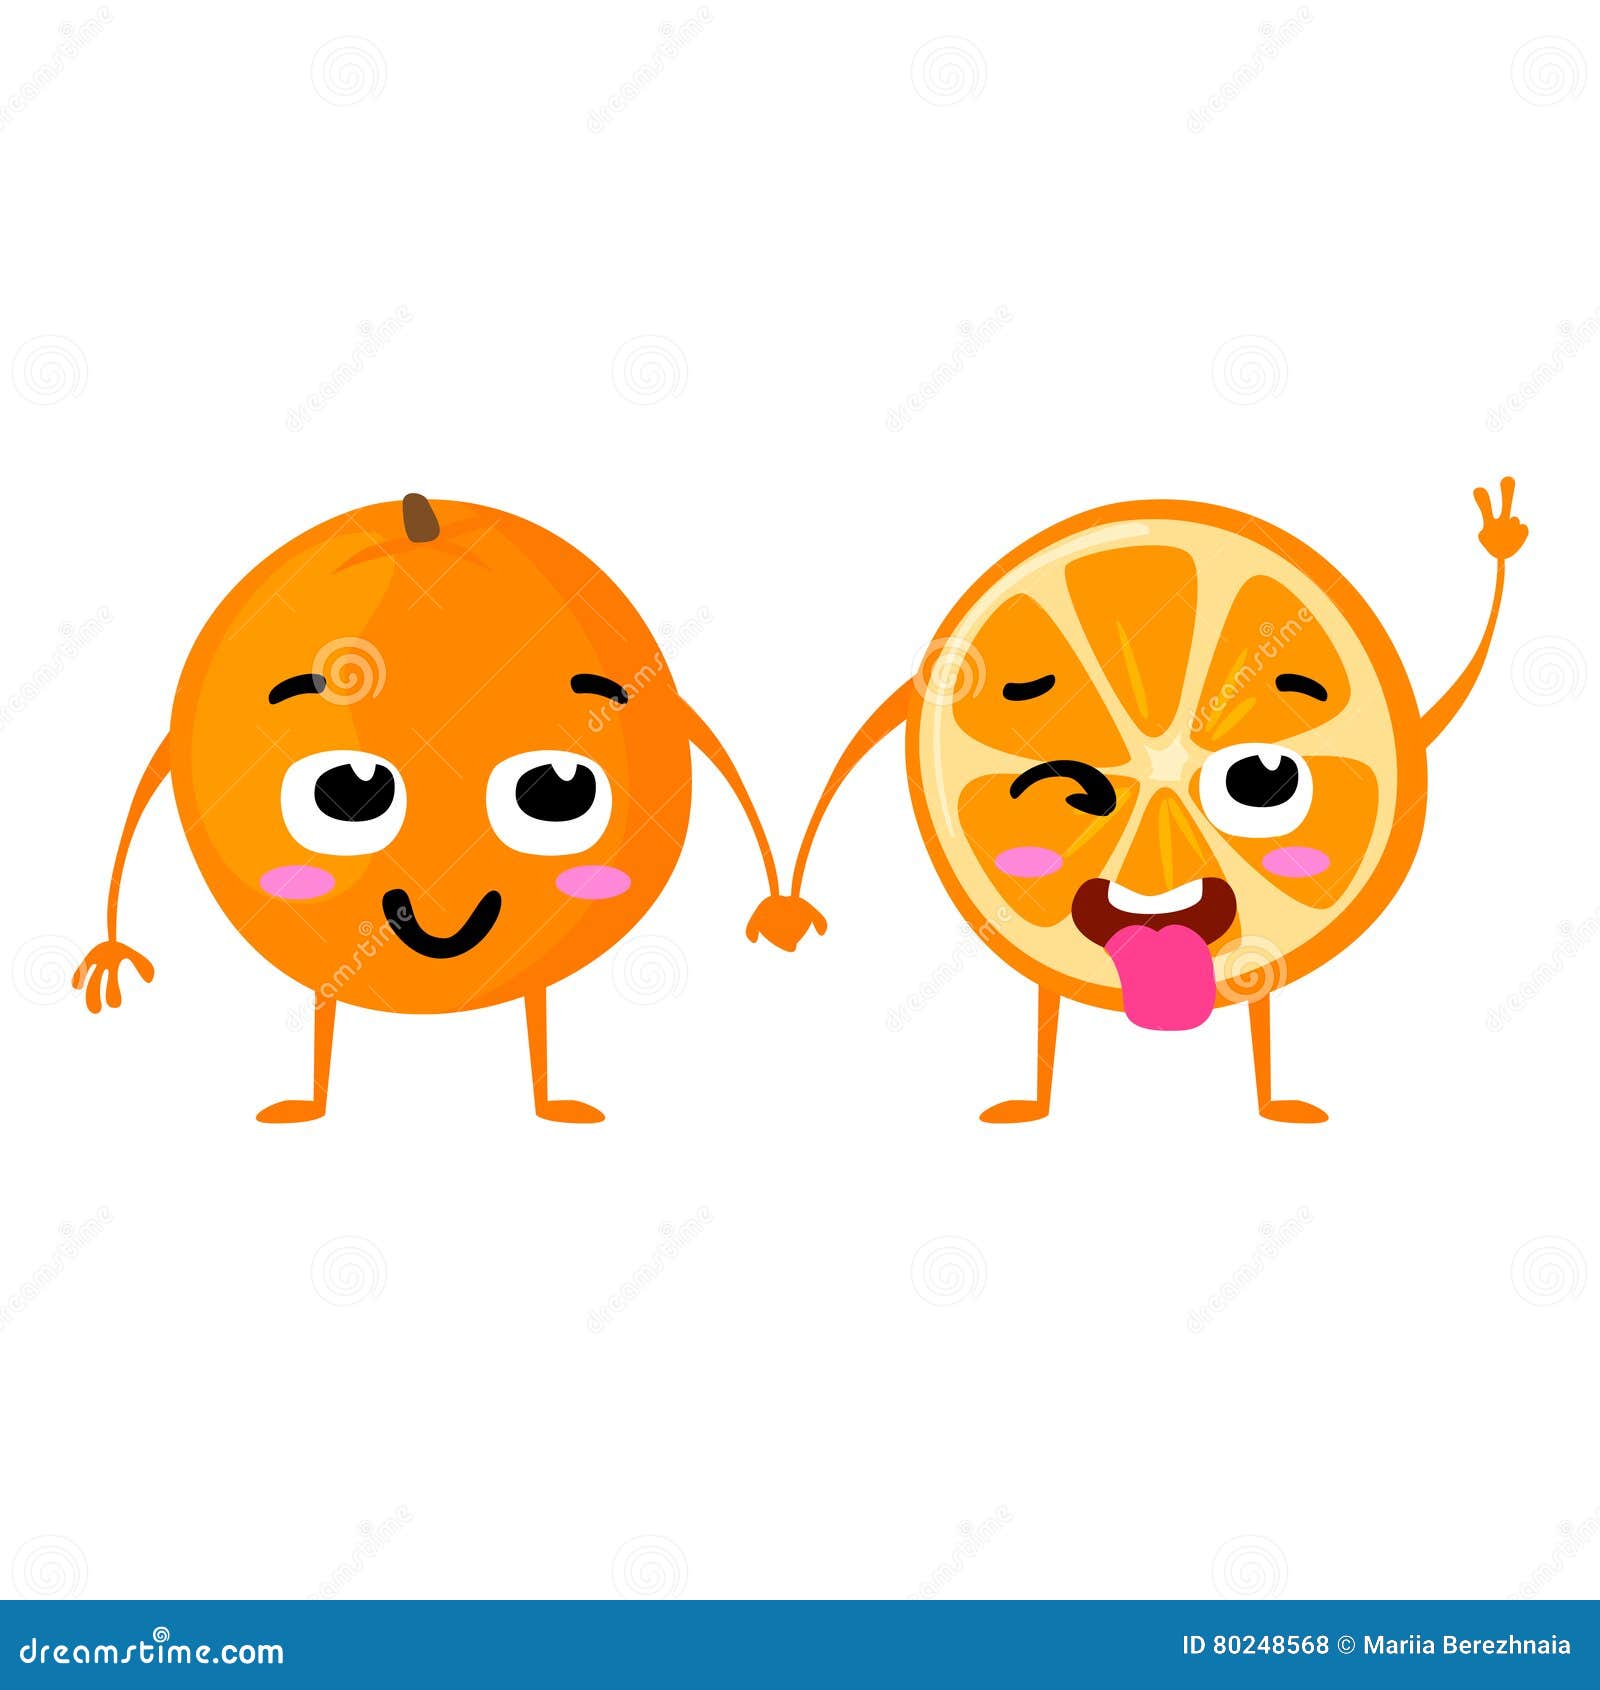 Orange. Cute Fruit Vector Character Couple Isolated on White Background.  Funny Emoticons Faces. Illustration. Stock Vector - Illustration of  element, healthy: 80248568